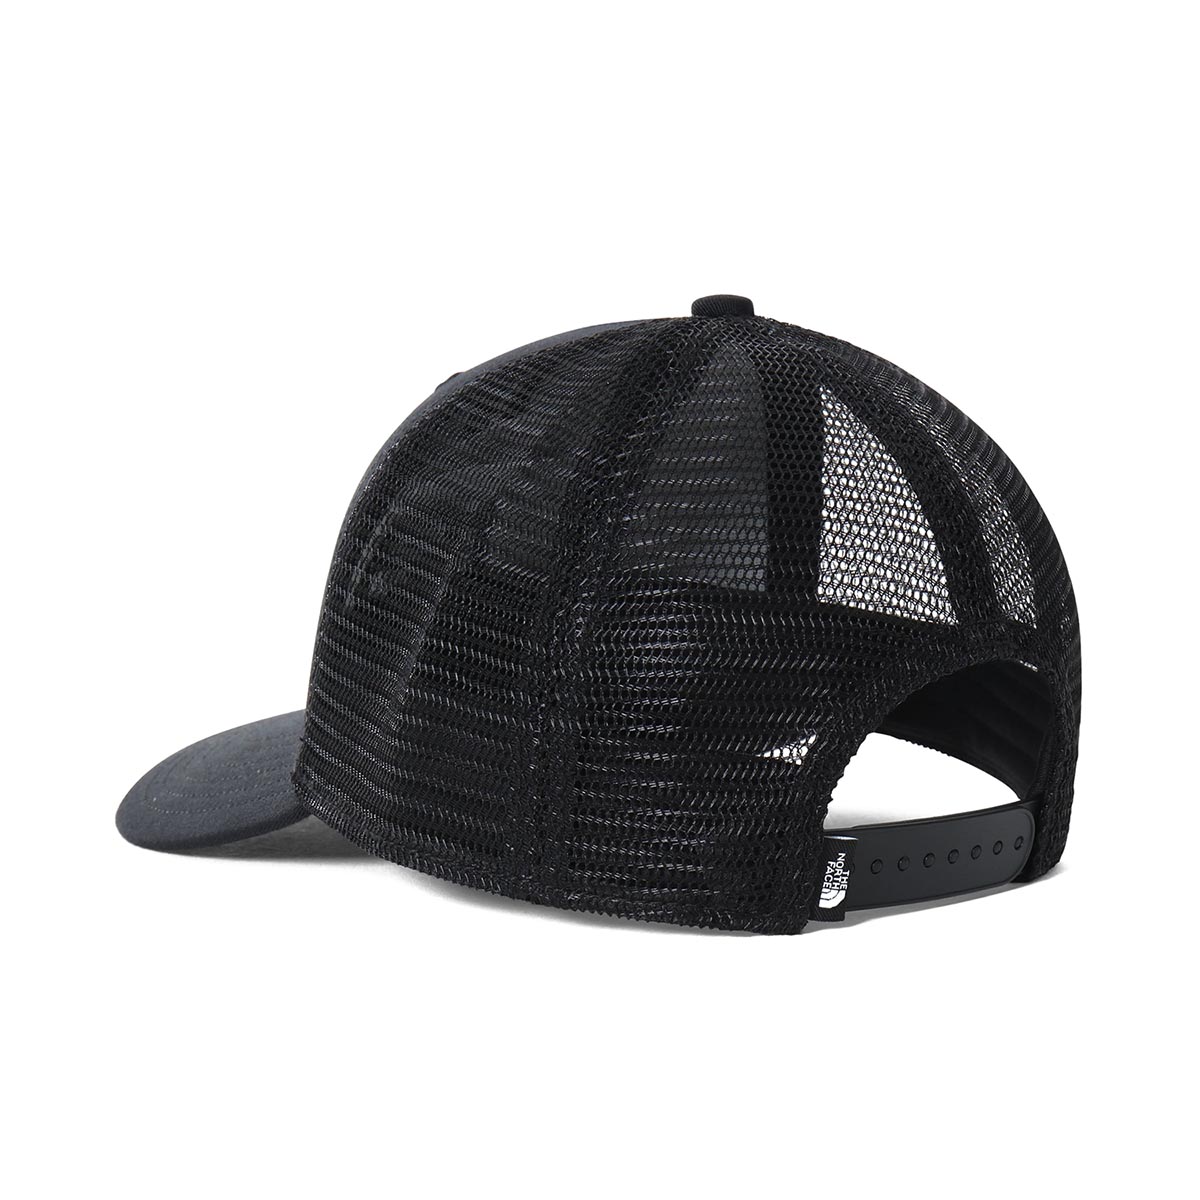 THE NORTH FACE - DEEP FIT MUDDER TRUCKER